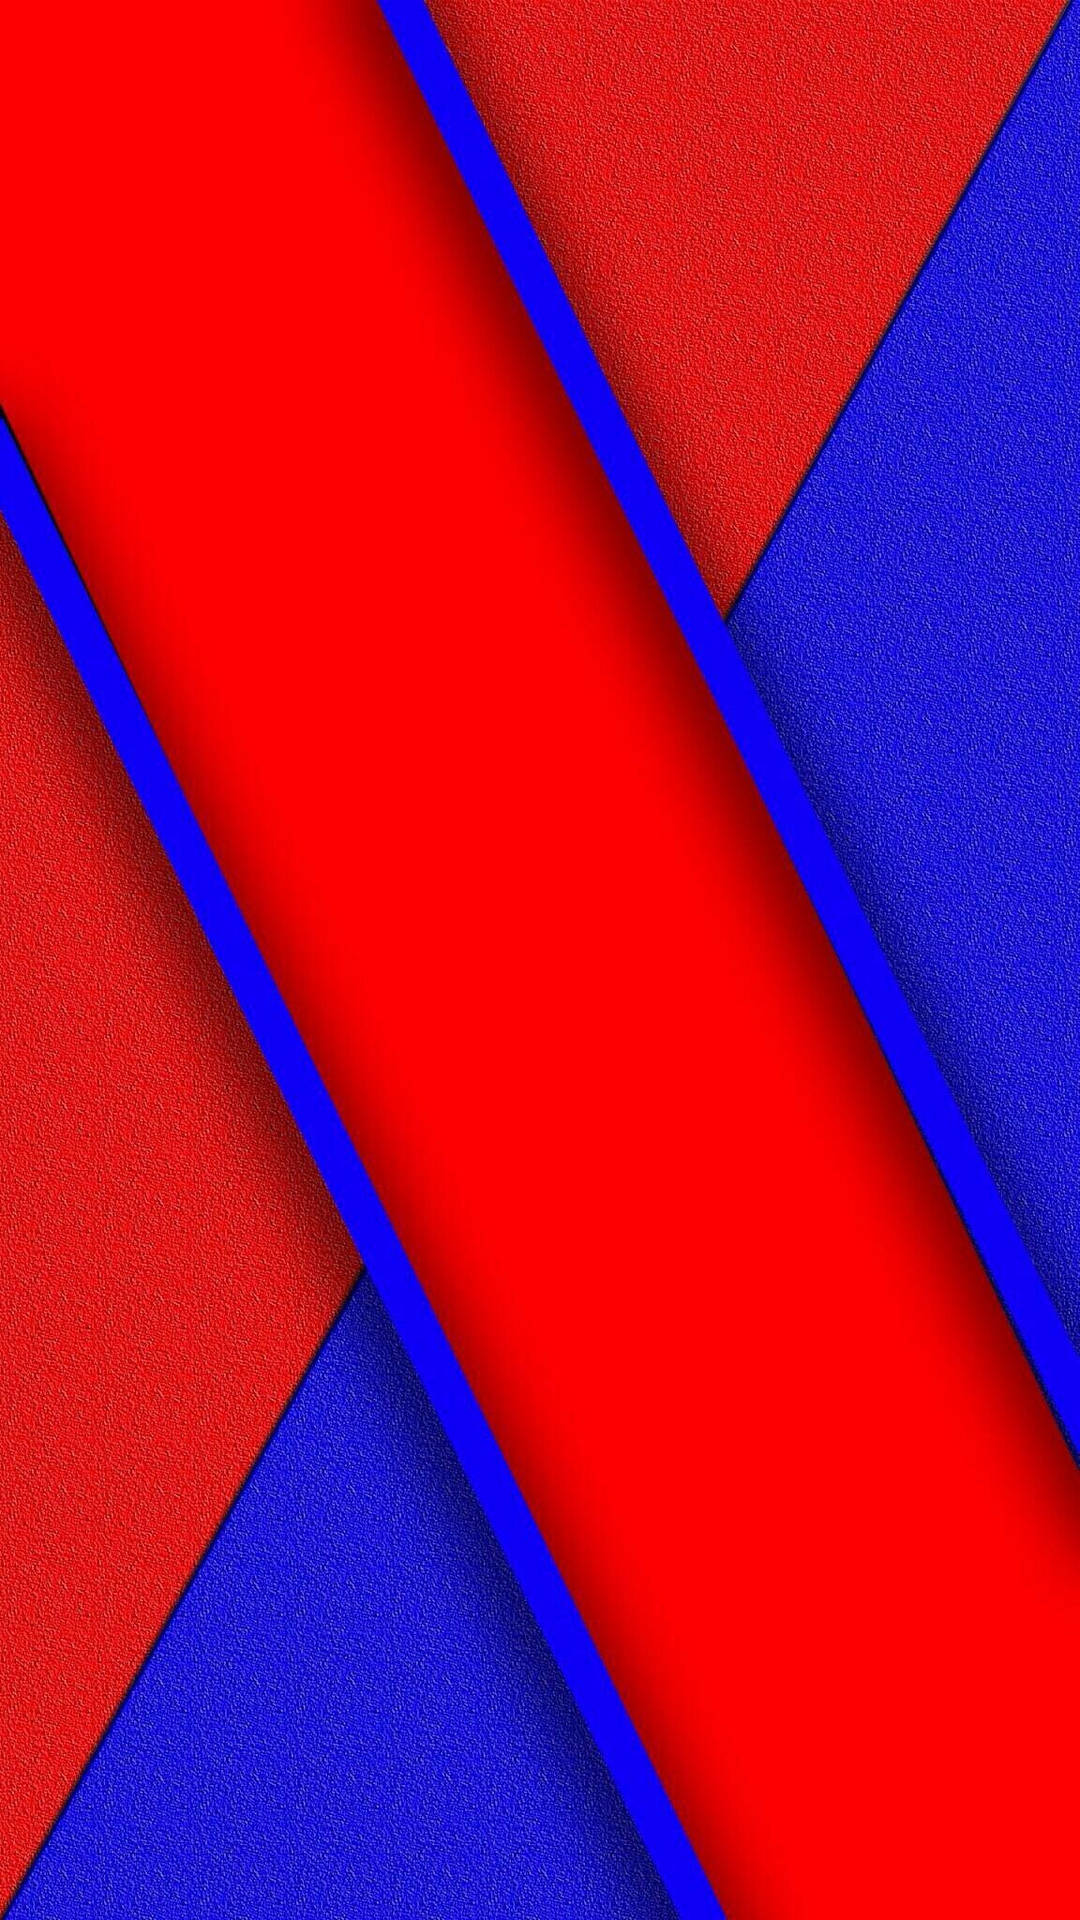 Vibrant Red And Blue Art Background